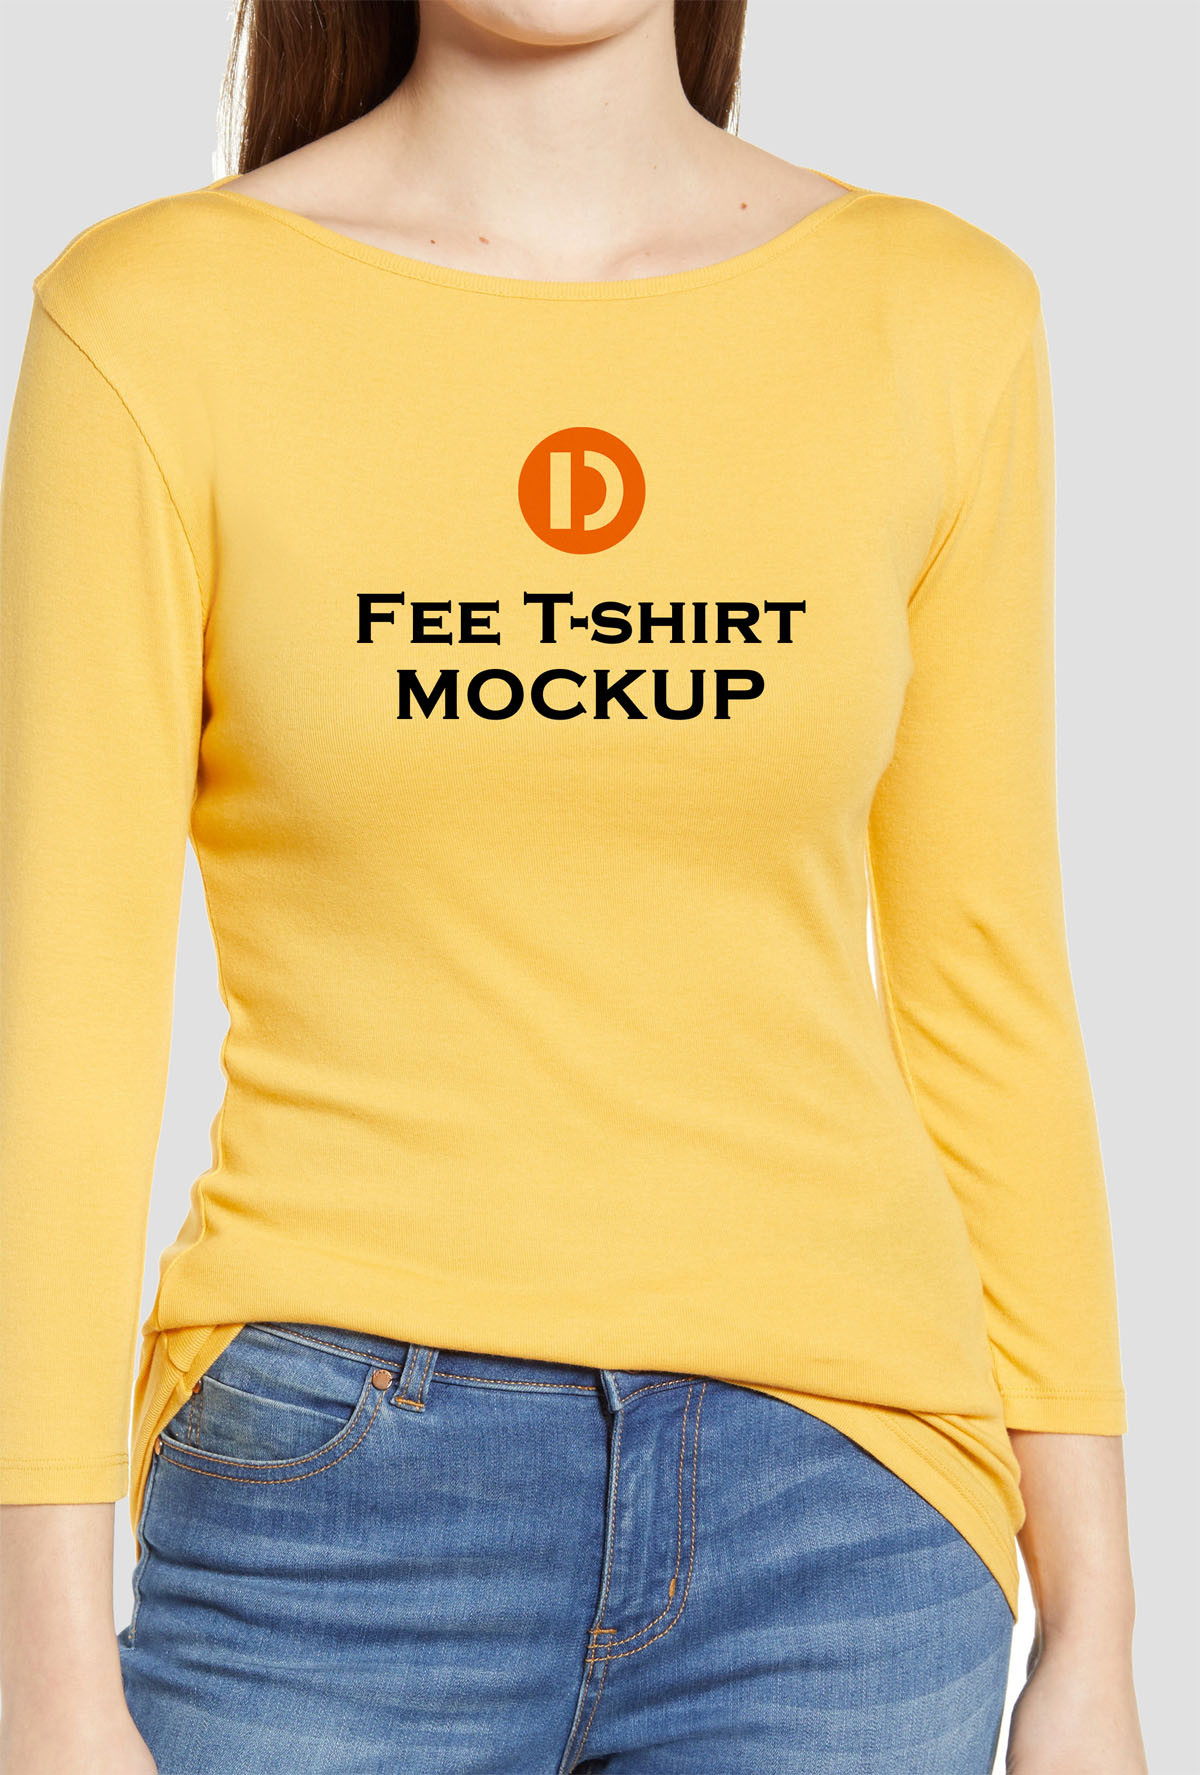 Free Woman T-Shirt Mockup - Find the Perfect Creative Mockups Freebies to Showcase your Project ...